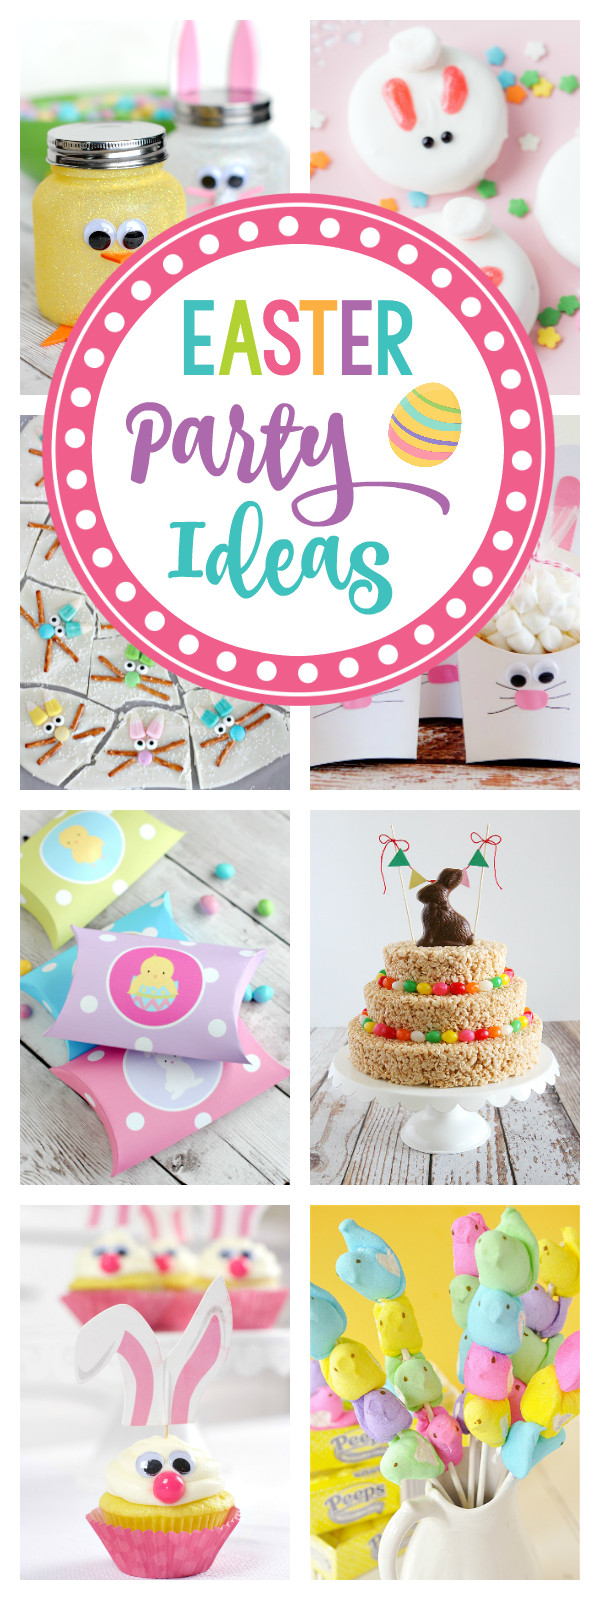 Easter Sunday Party Ideas
 25 Fun Easter Party Ideas for Kids – Fun Squared